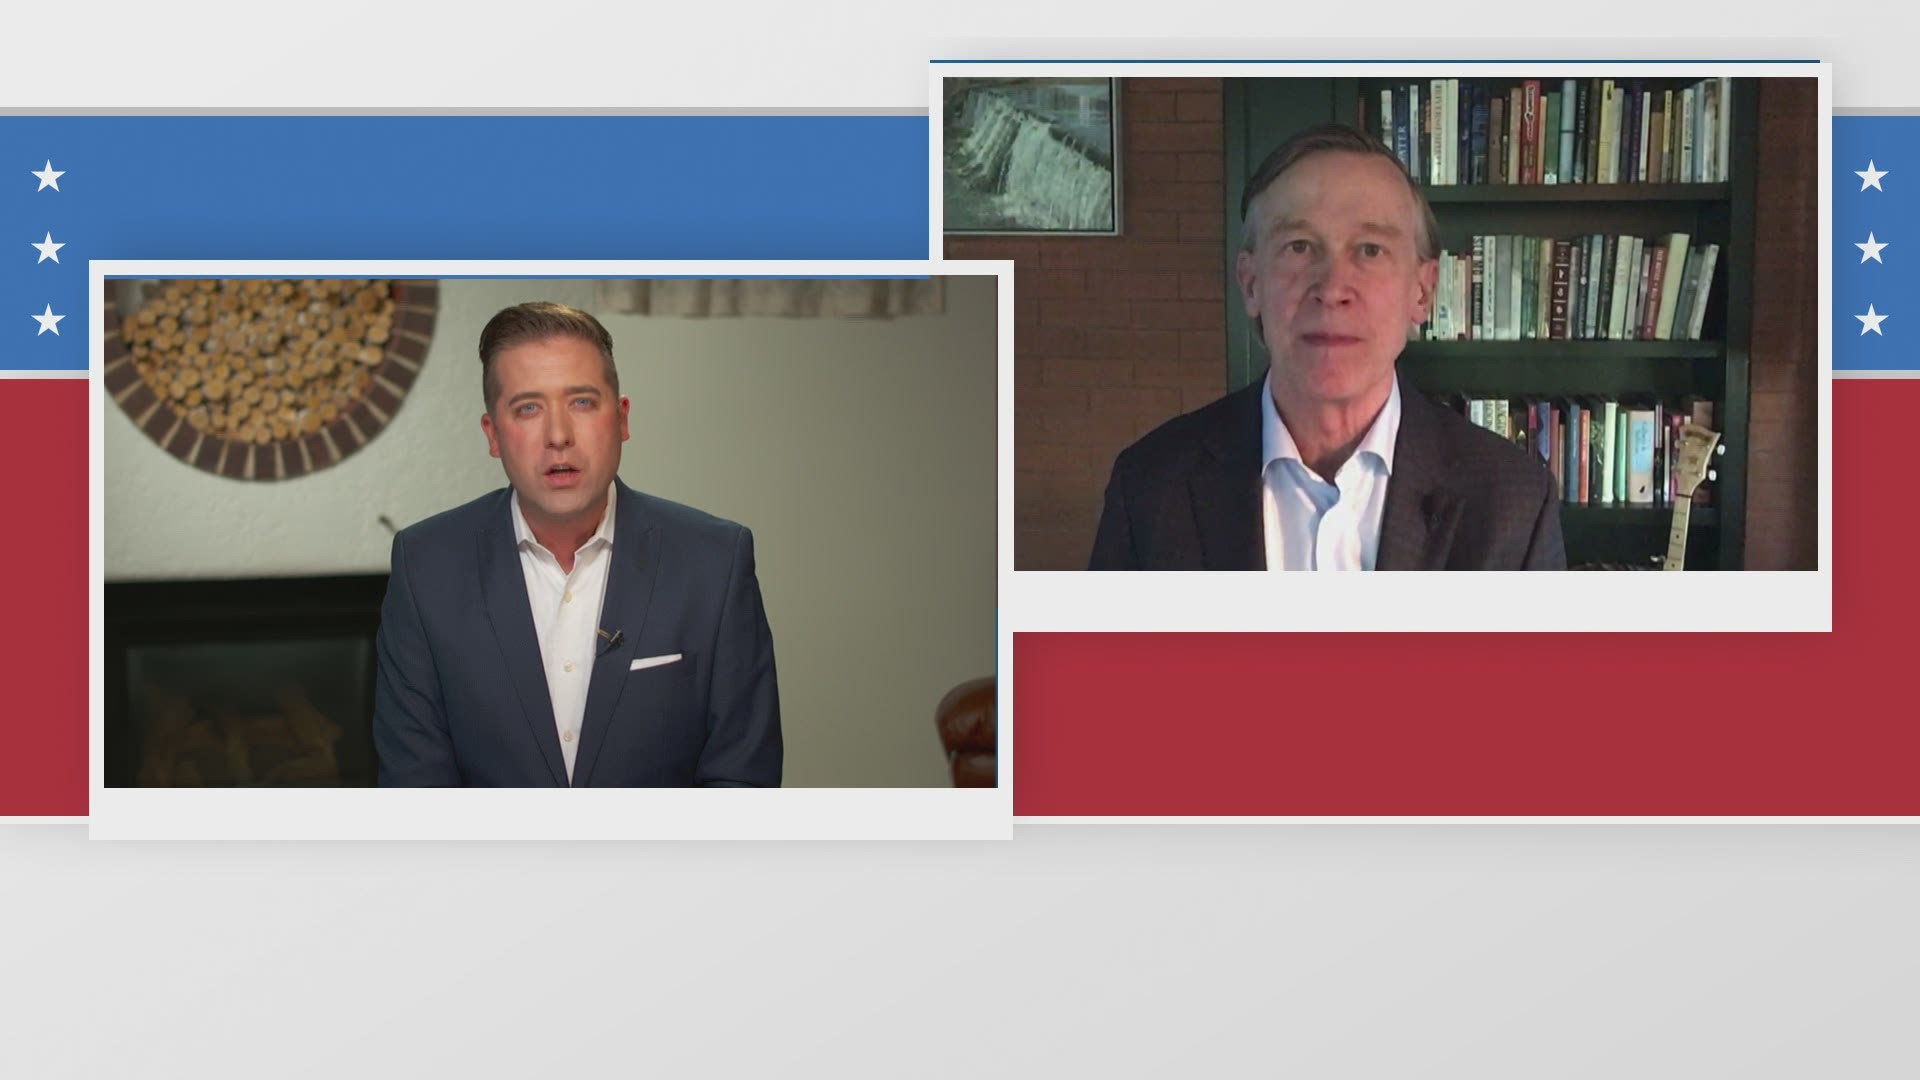 Hickenlooper responds to the ethics commission's findings last week and the 'dark money Republican' group; Romanoff calls on his opponent to withdraw from the race.